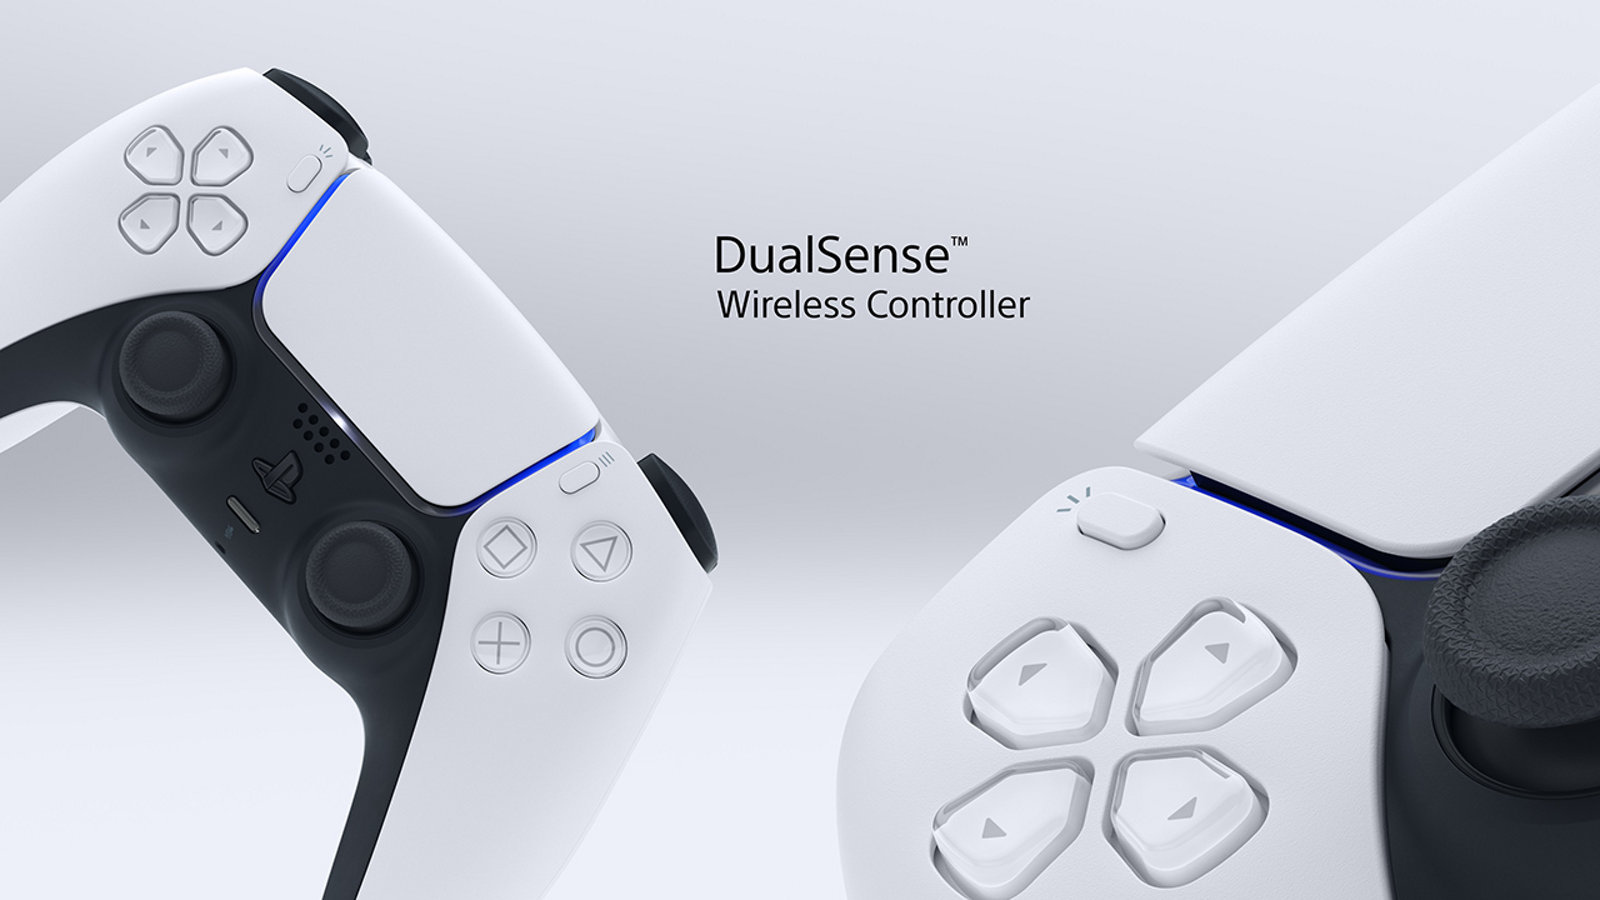 DualSense wireless controller for PS5 Price in Nigeria. Buy DualSense wireless controller for PS5 in Lagos and Abuja Nigeria